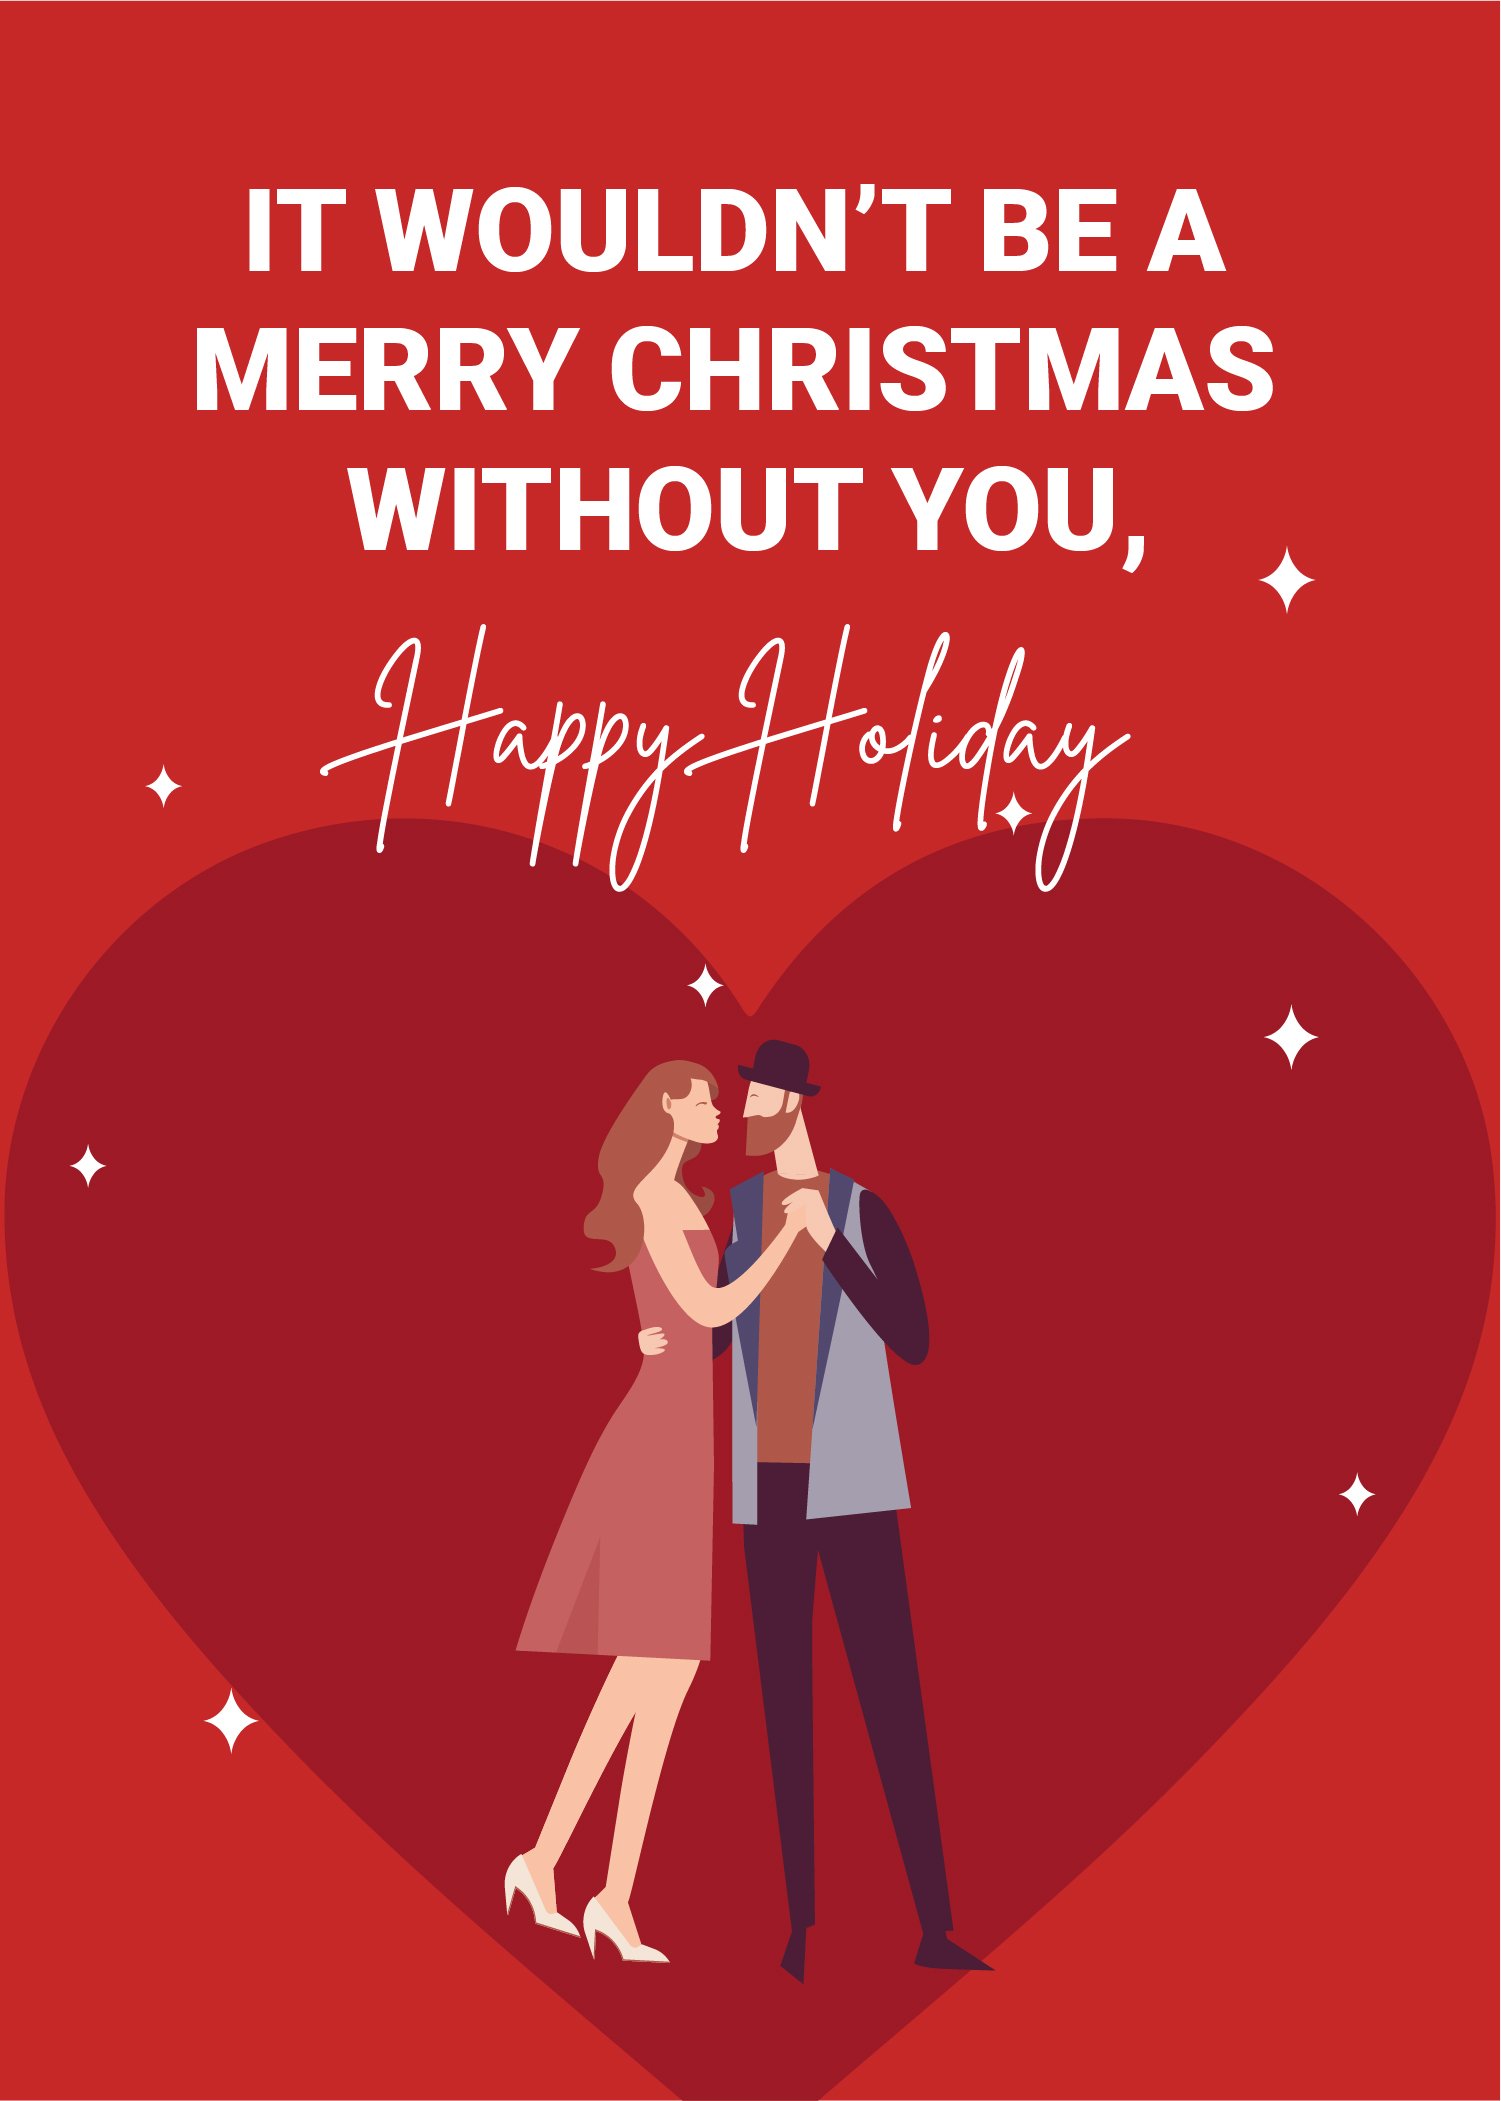 Christmas Wishes For Friend in Word, Google Docs, Illustrator, PSD, Apple Pages, Publisher, EPS, SVG, JPG, PNG